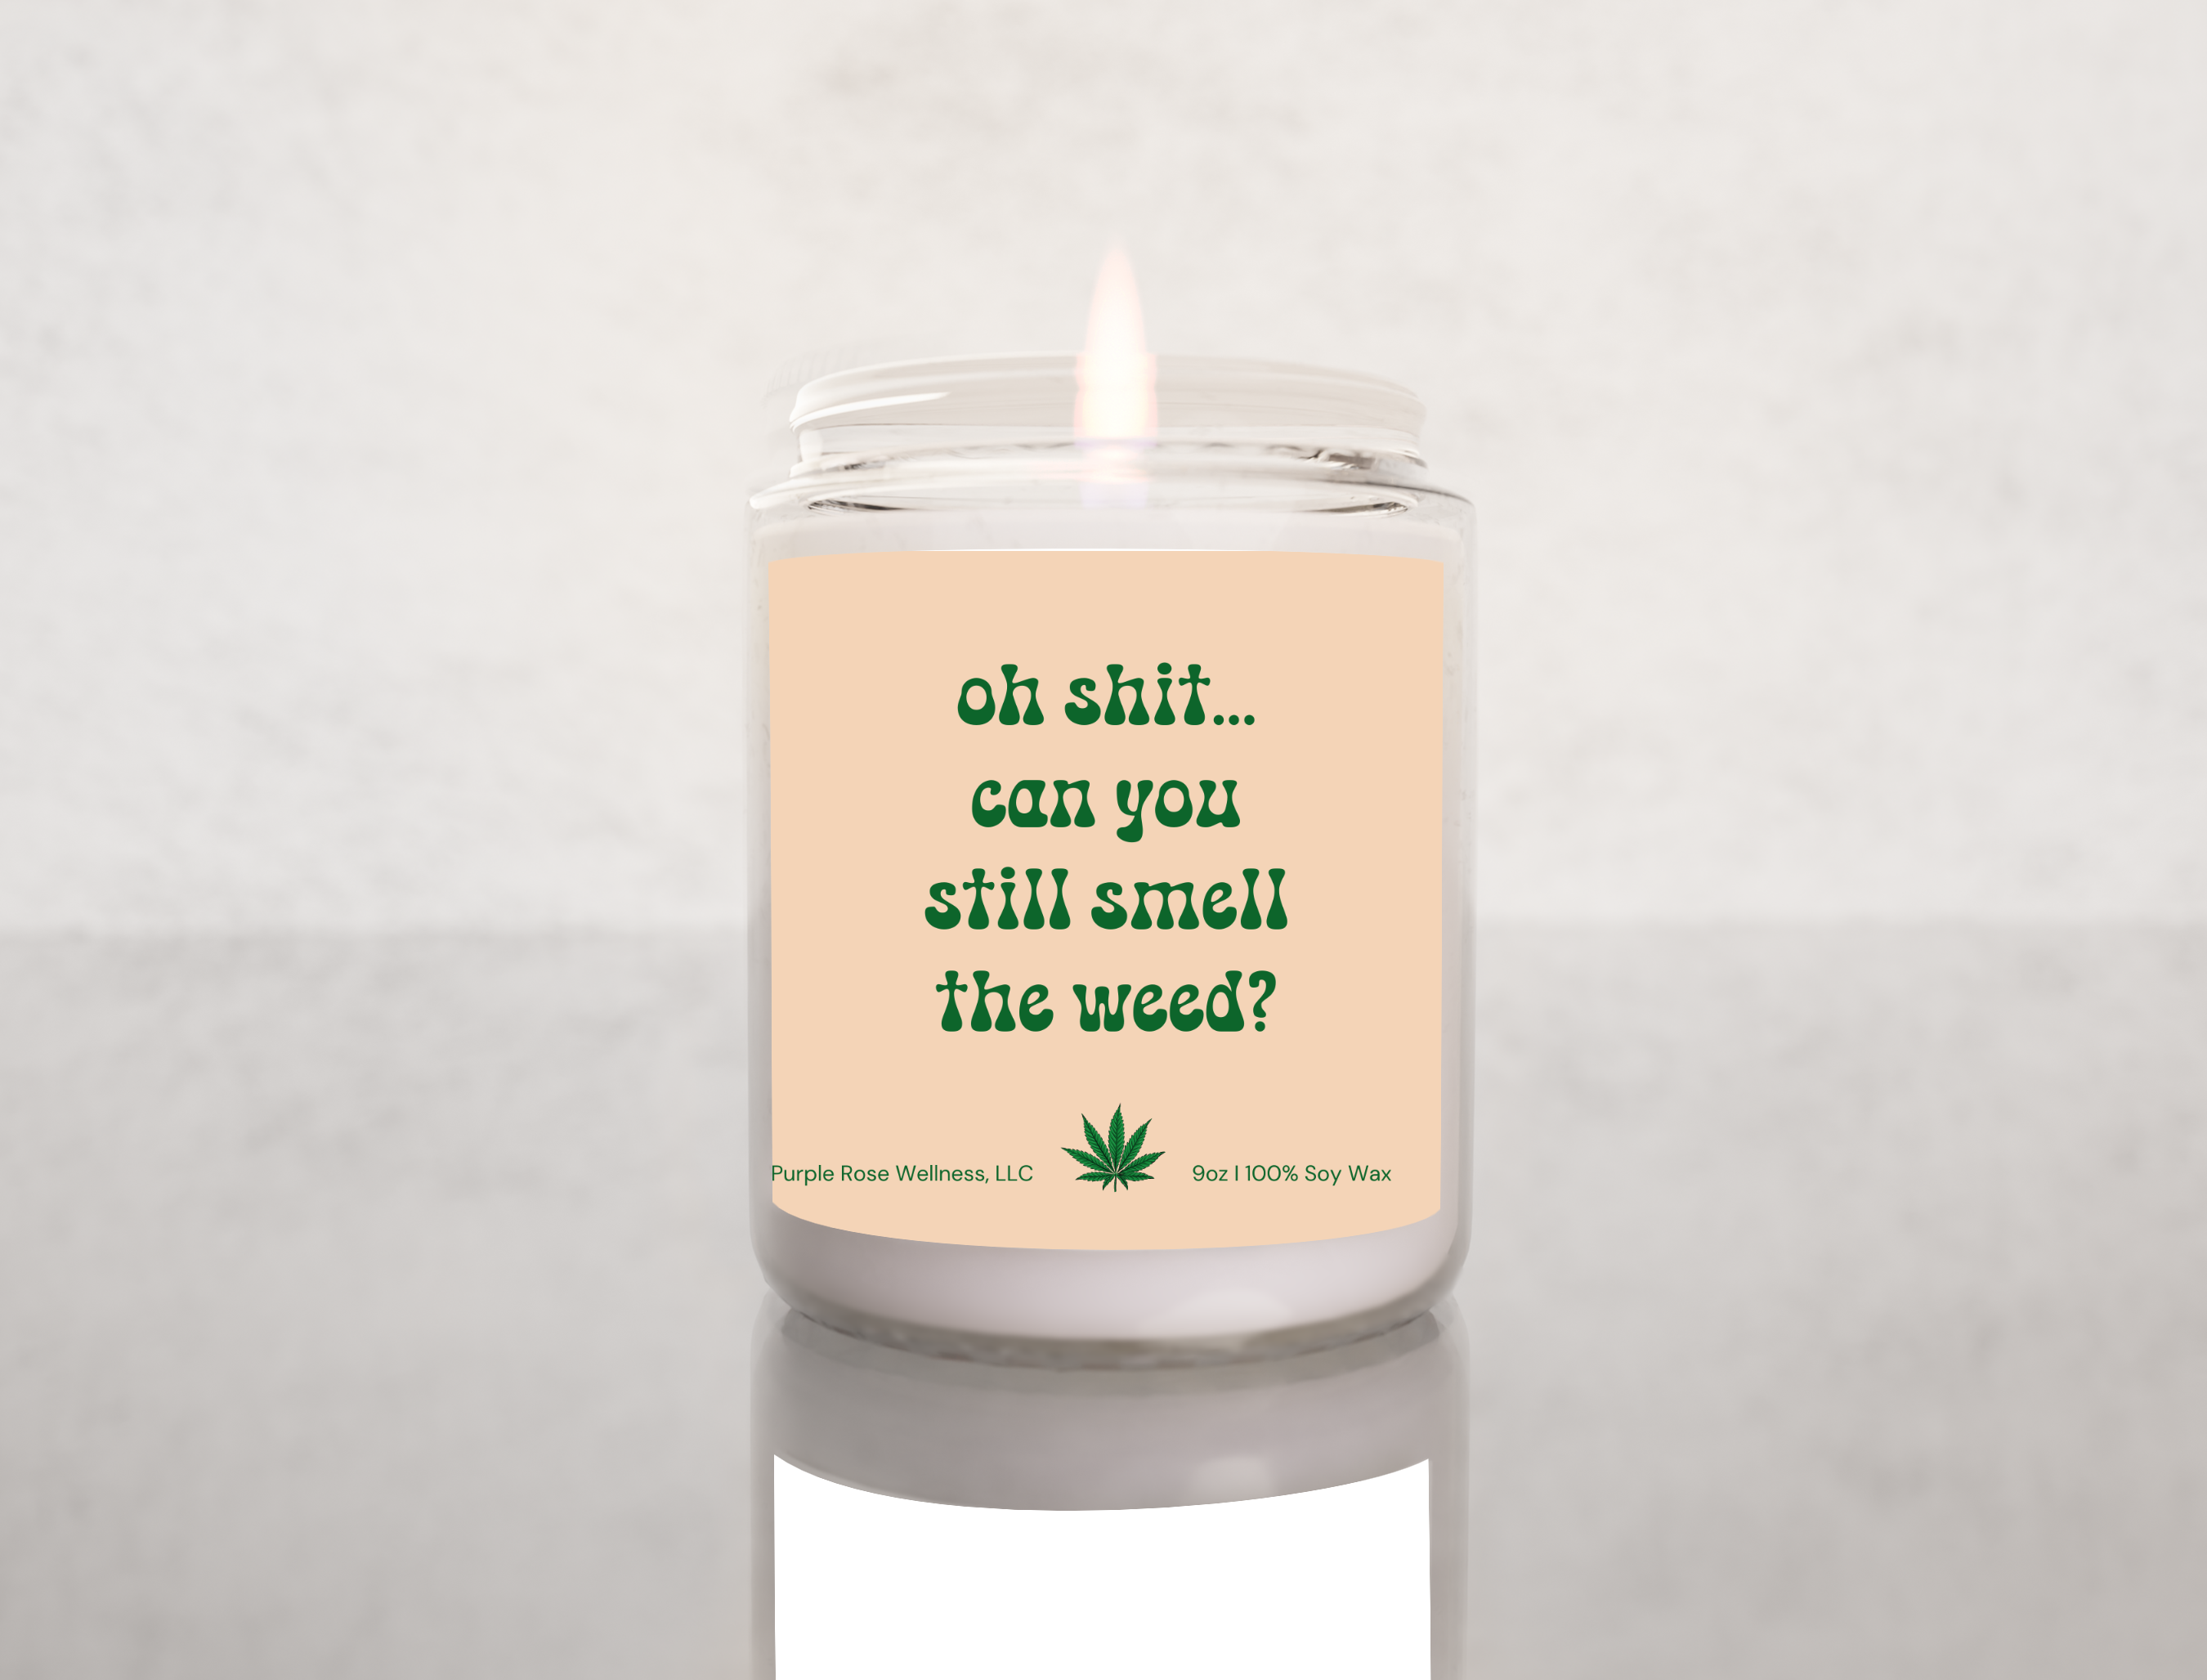 Can You Still Smell The Weed Soy Candle